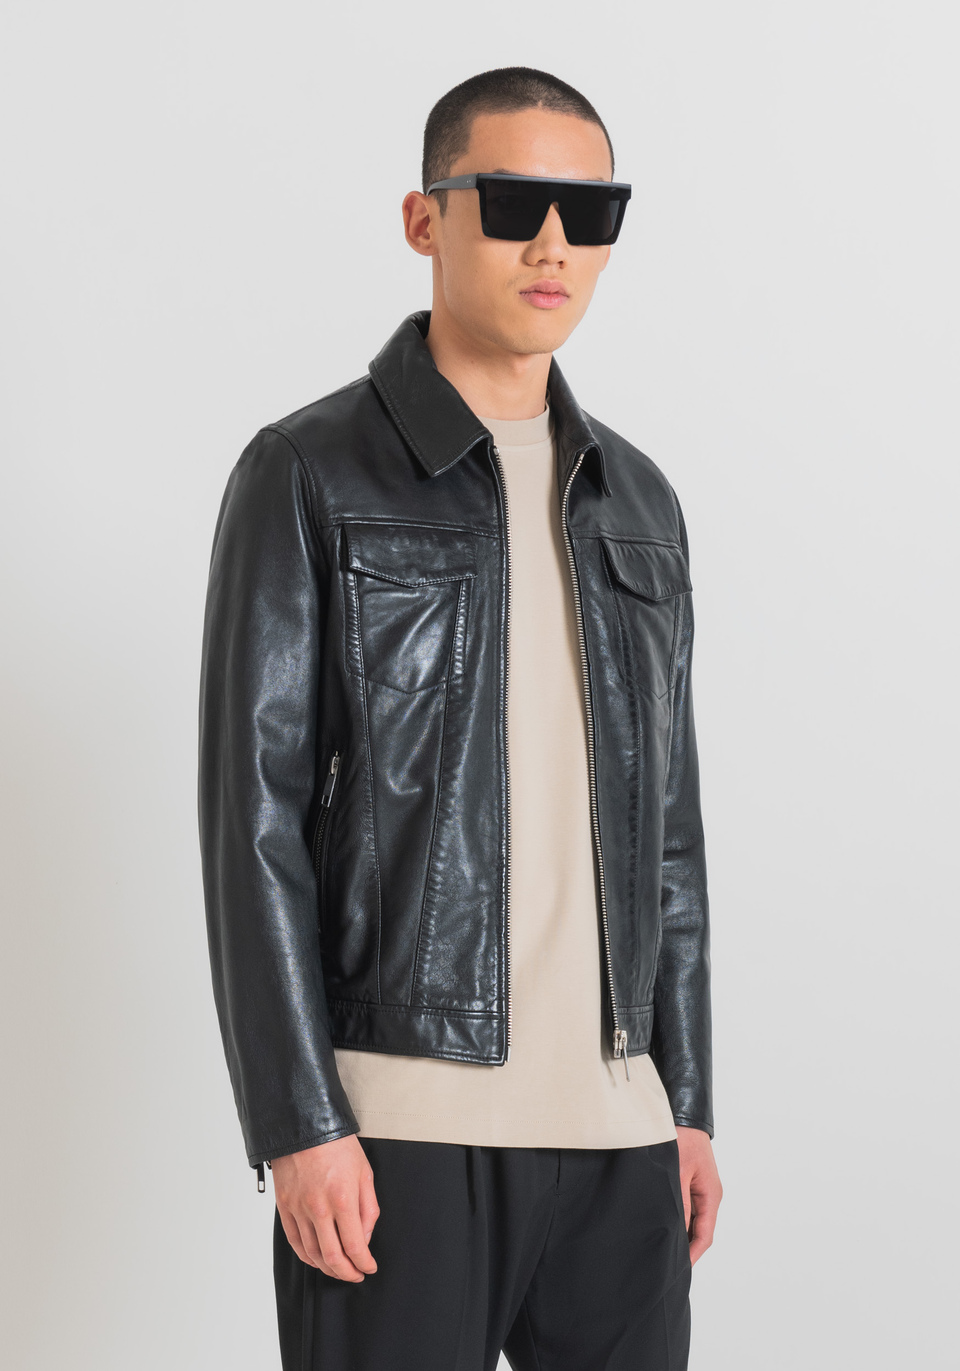 SLIM FIT JACKET IN GENUINE LEATHER WITH SHIRT COLLAR - Antony Morato Online Shop